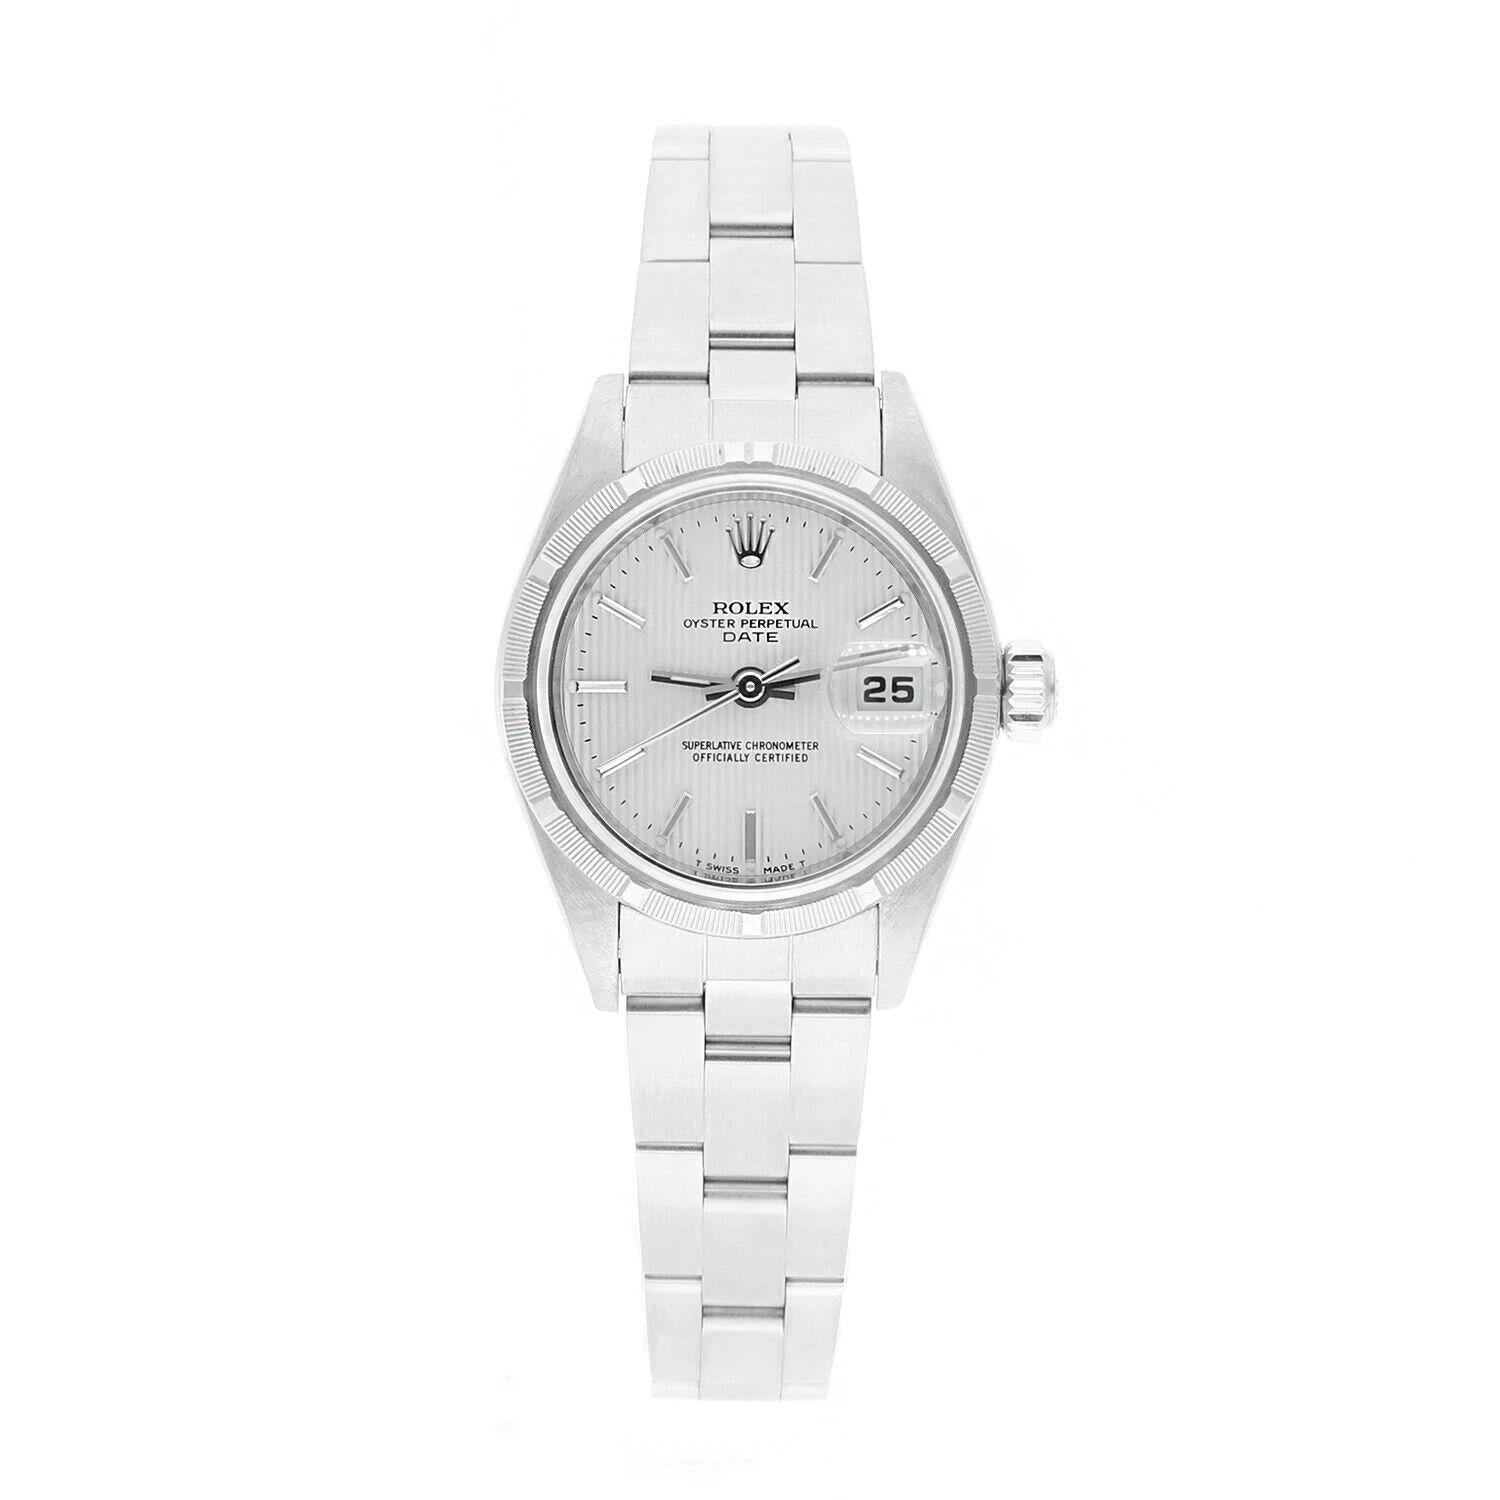 Rolex Date Silver Dial Oyster Bracelet Stainless Steel Ladies Watch 79190, Circa 1999.
This watch has been professionally polished, serviced and is in excellent overall condition. There are absolutely no visible scratches or blemishes. All parts are